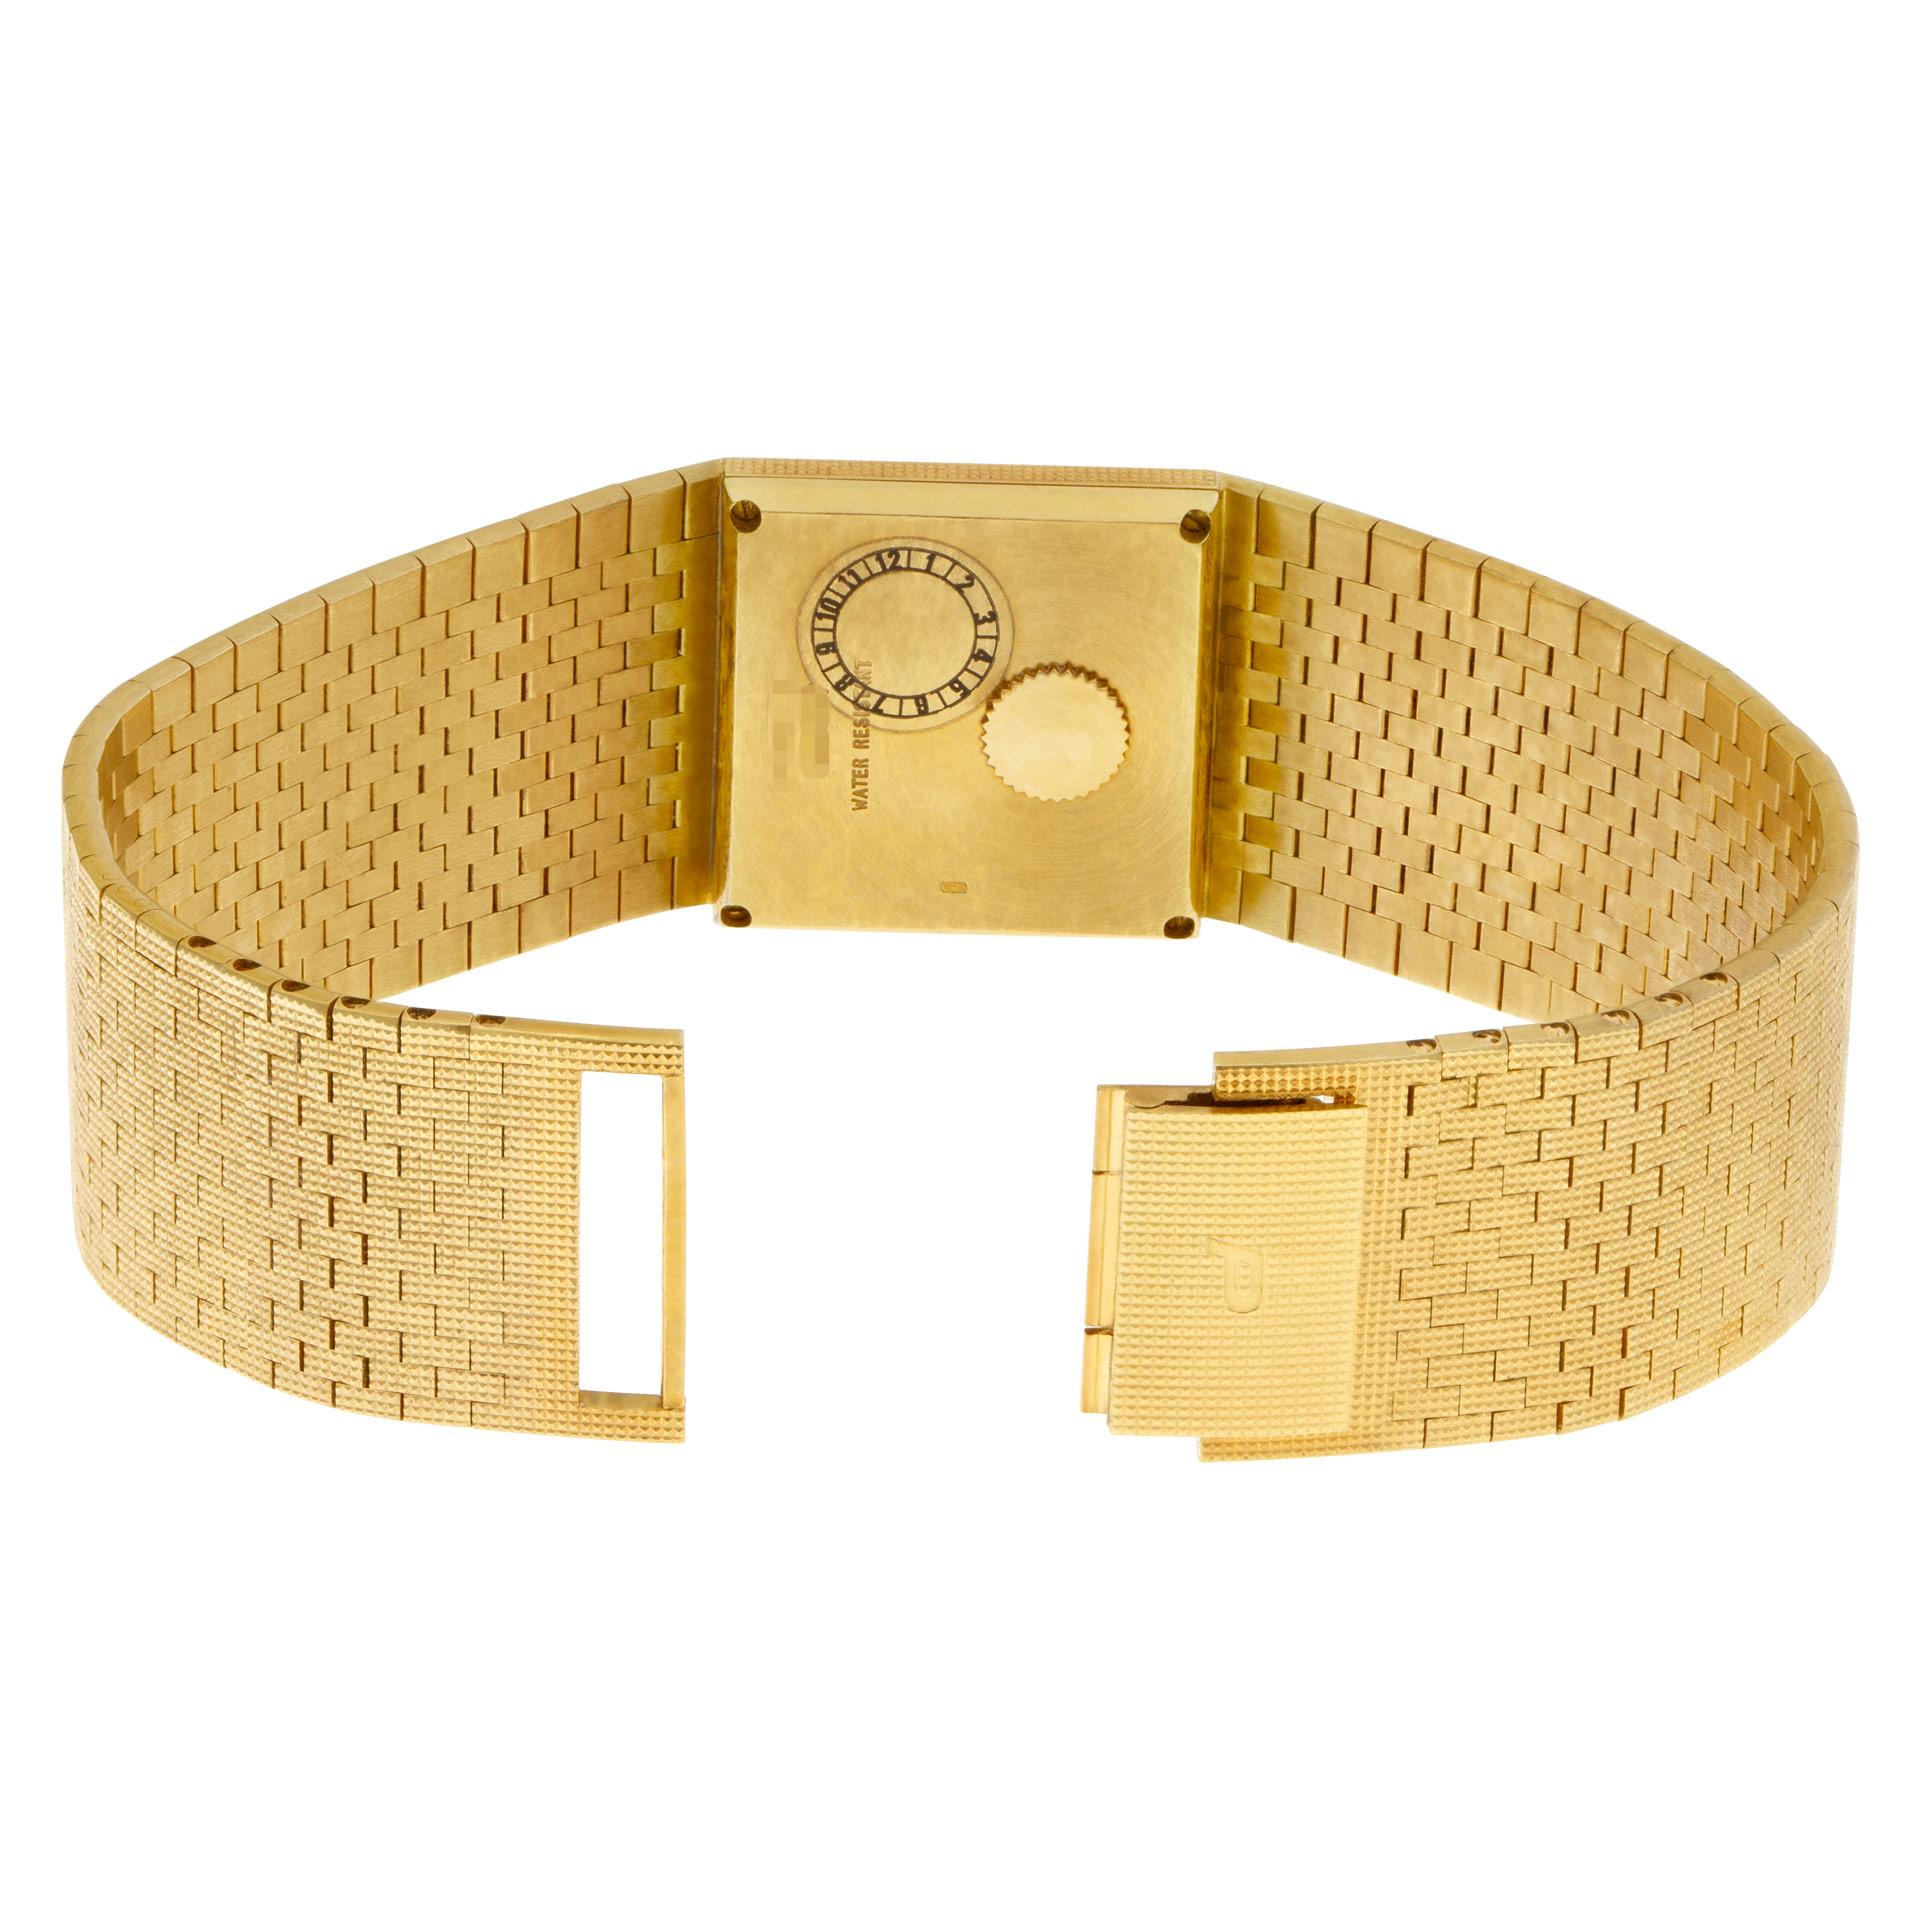 Women's or Men's Piaget Polo in 18k Yellow Gold with an Integrated Mesh Bracelet Wristwatch